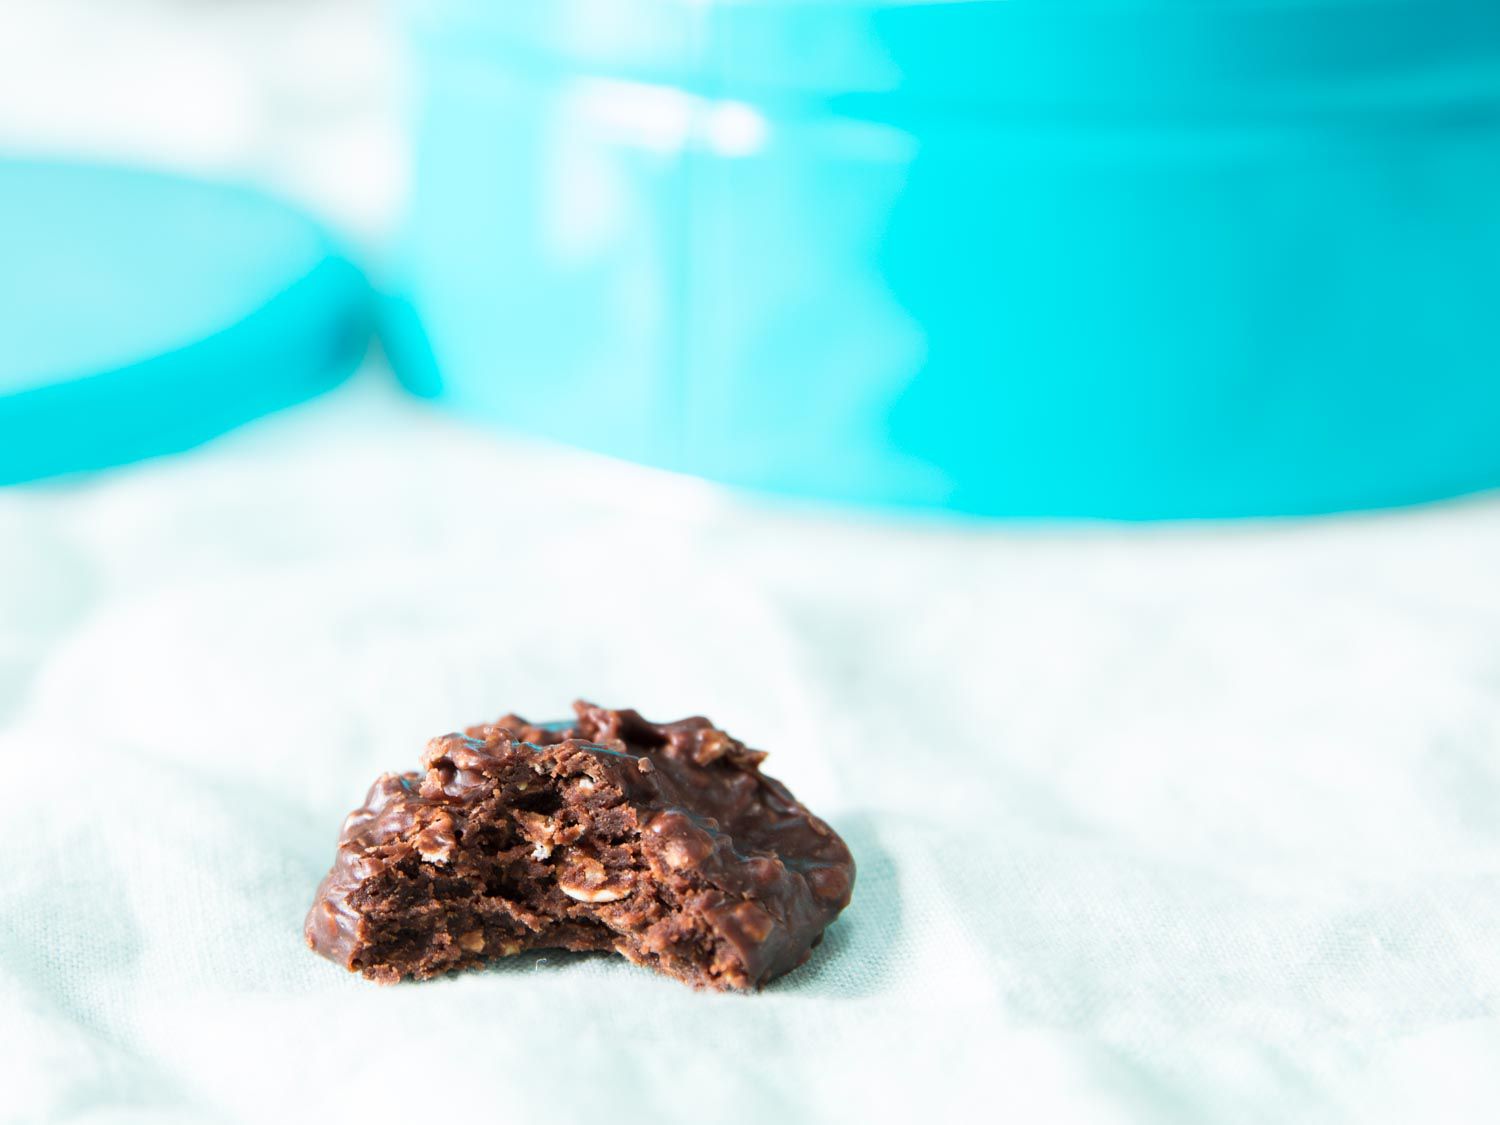 A no-bake cookie lies on a white kitchen towel. A bite reveals the soft, moist interior.